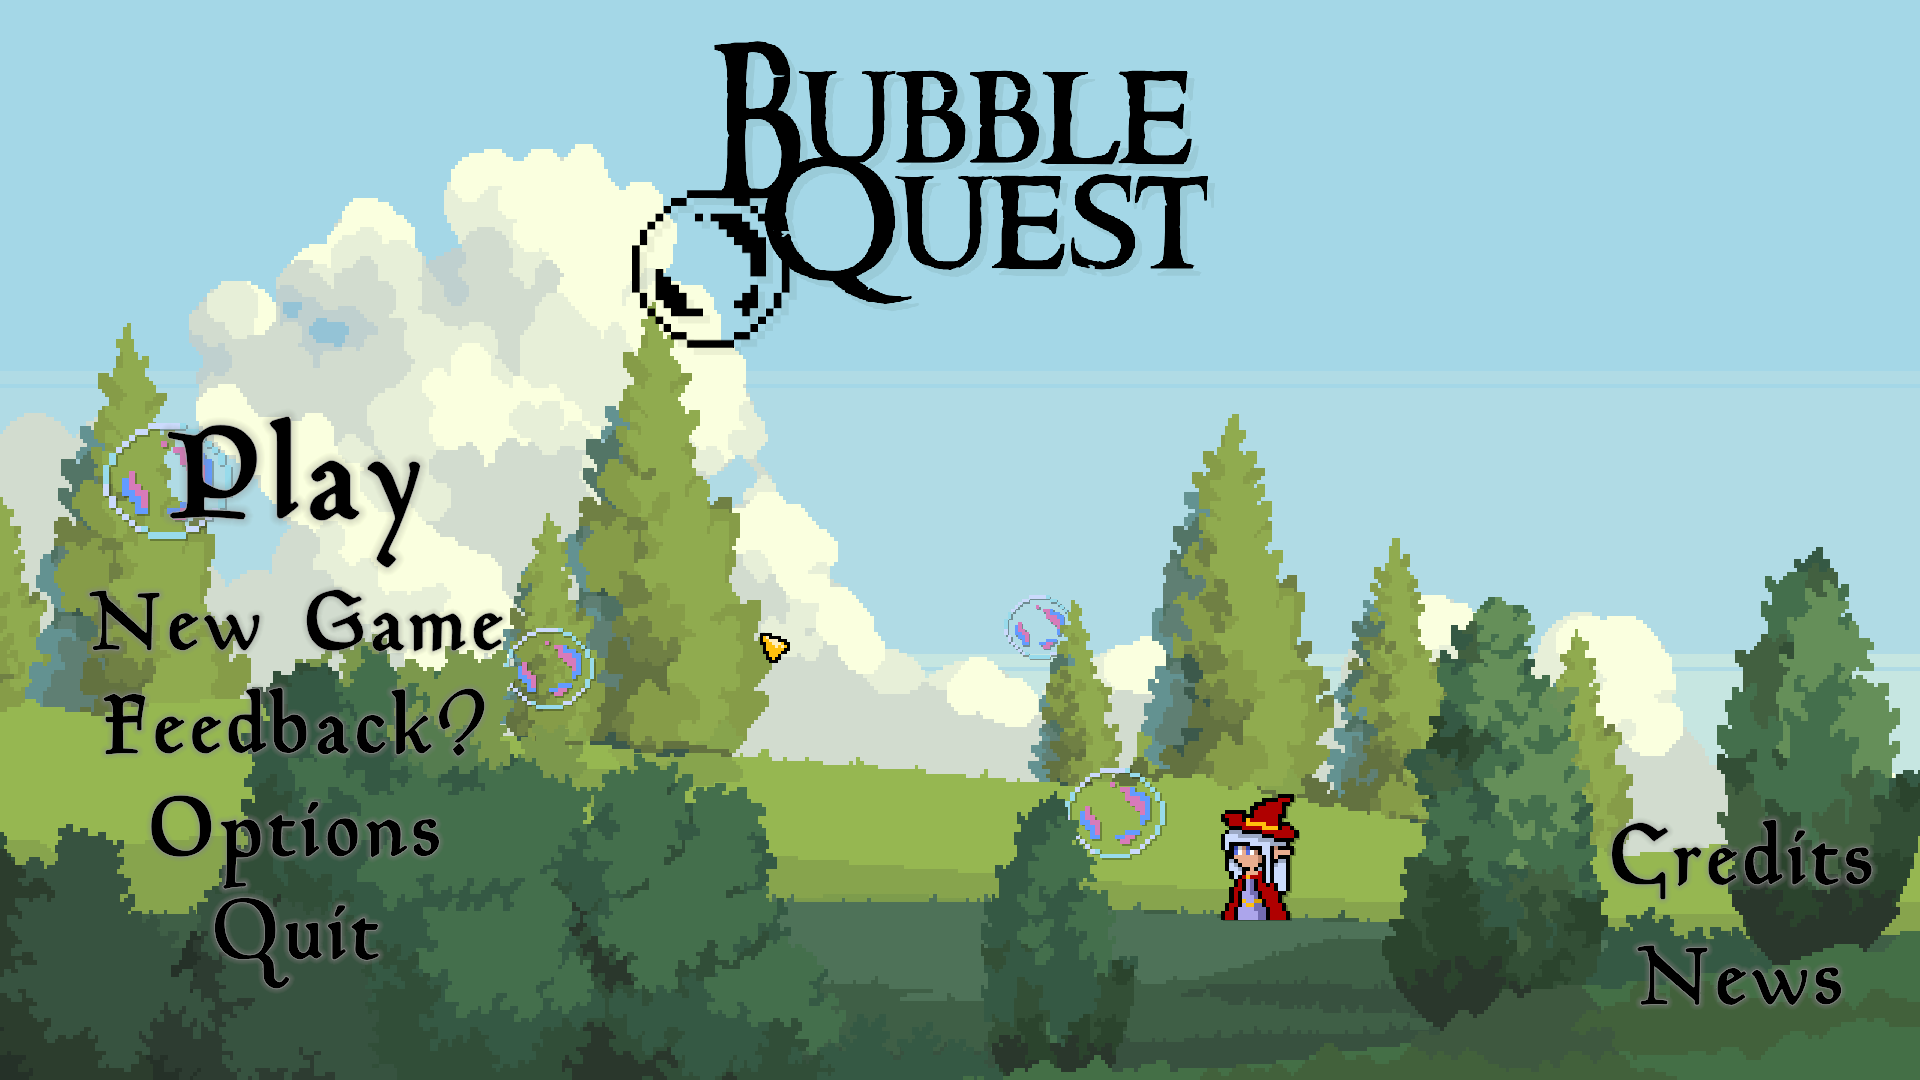 Alpha Quest- Pop the bubble and spell the word